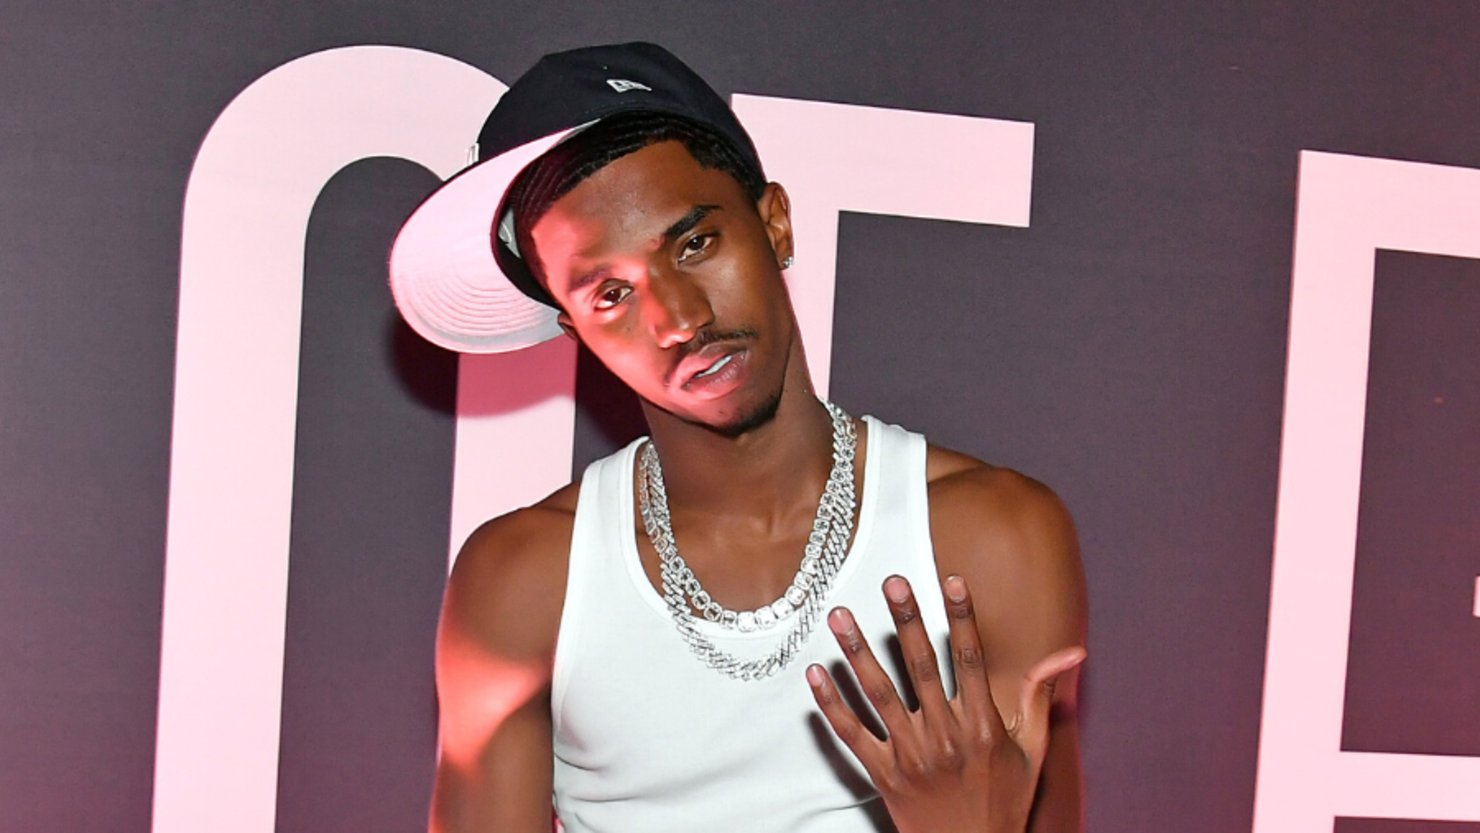 King Combs Speaks On His Debut Album: 'It's Going To Be A Movie